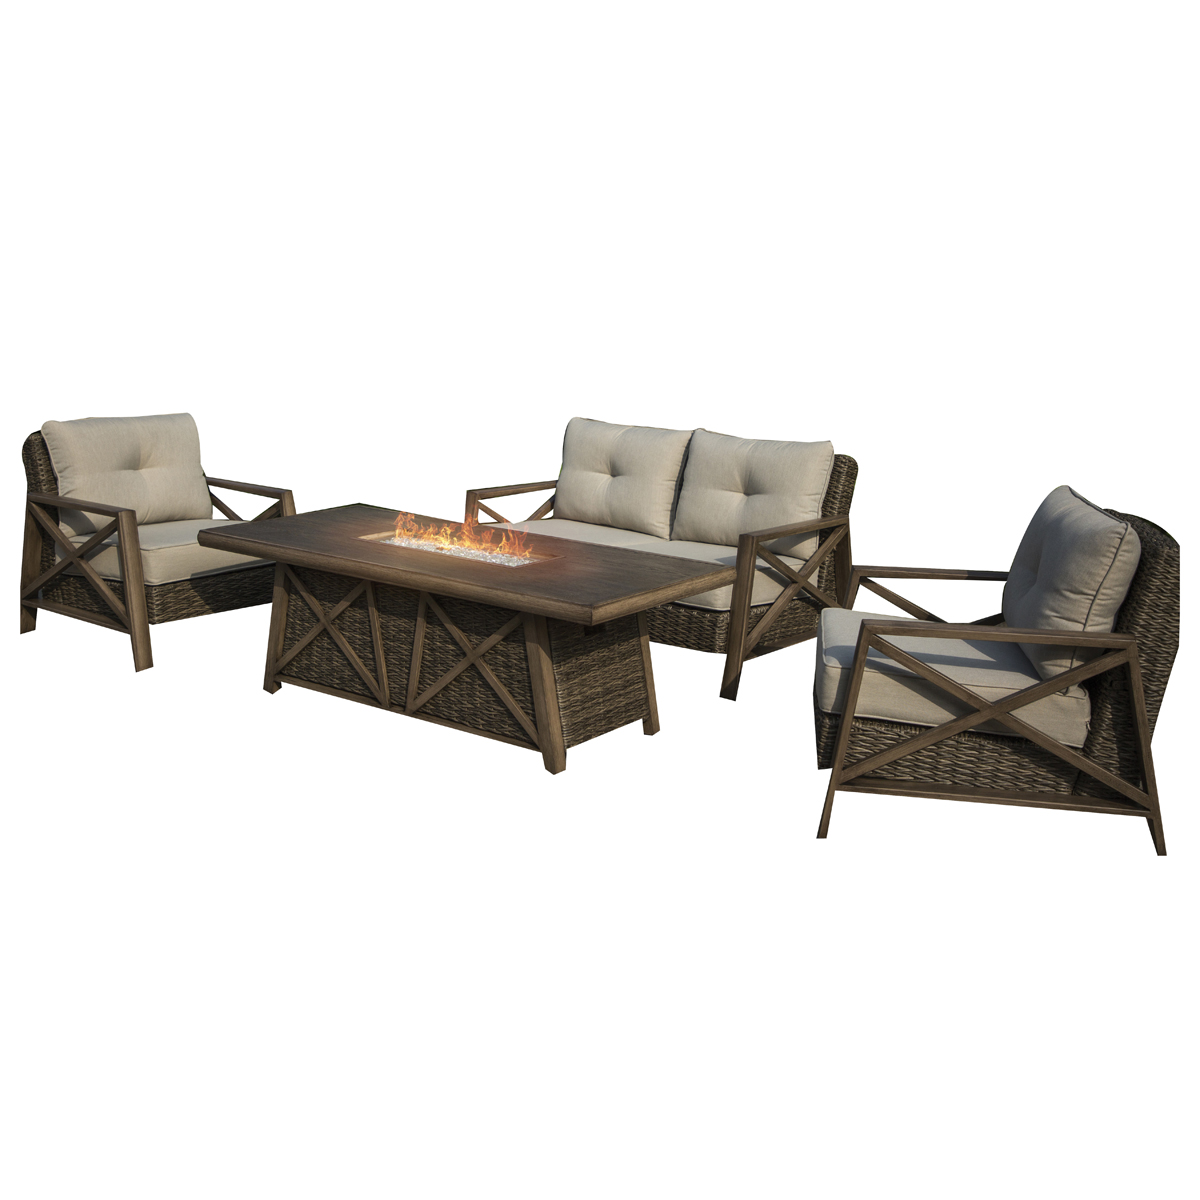 MS22002 Yukon Deep Seating Fire Pit Set with 72 in Table, Aluminum Frames with Woven Wicker